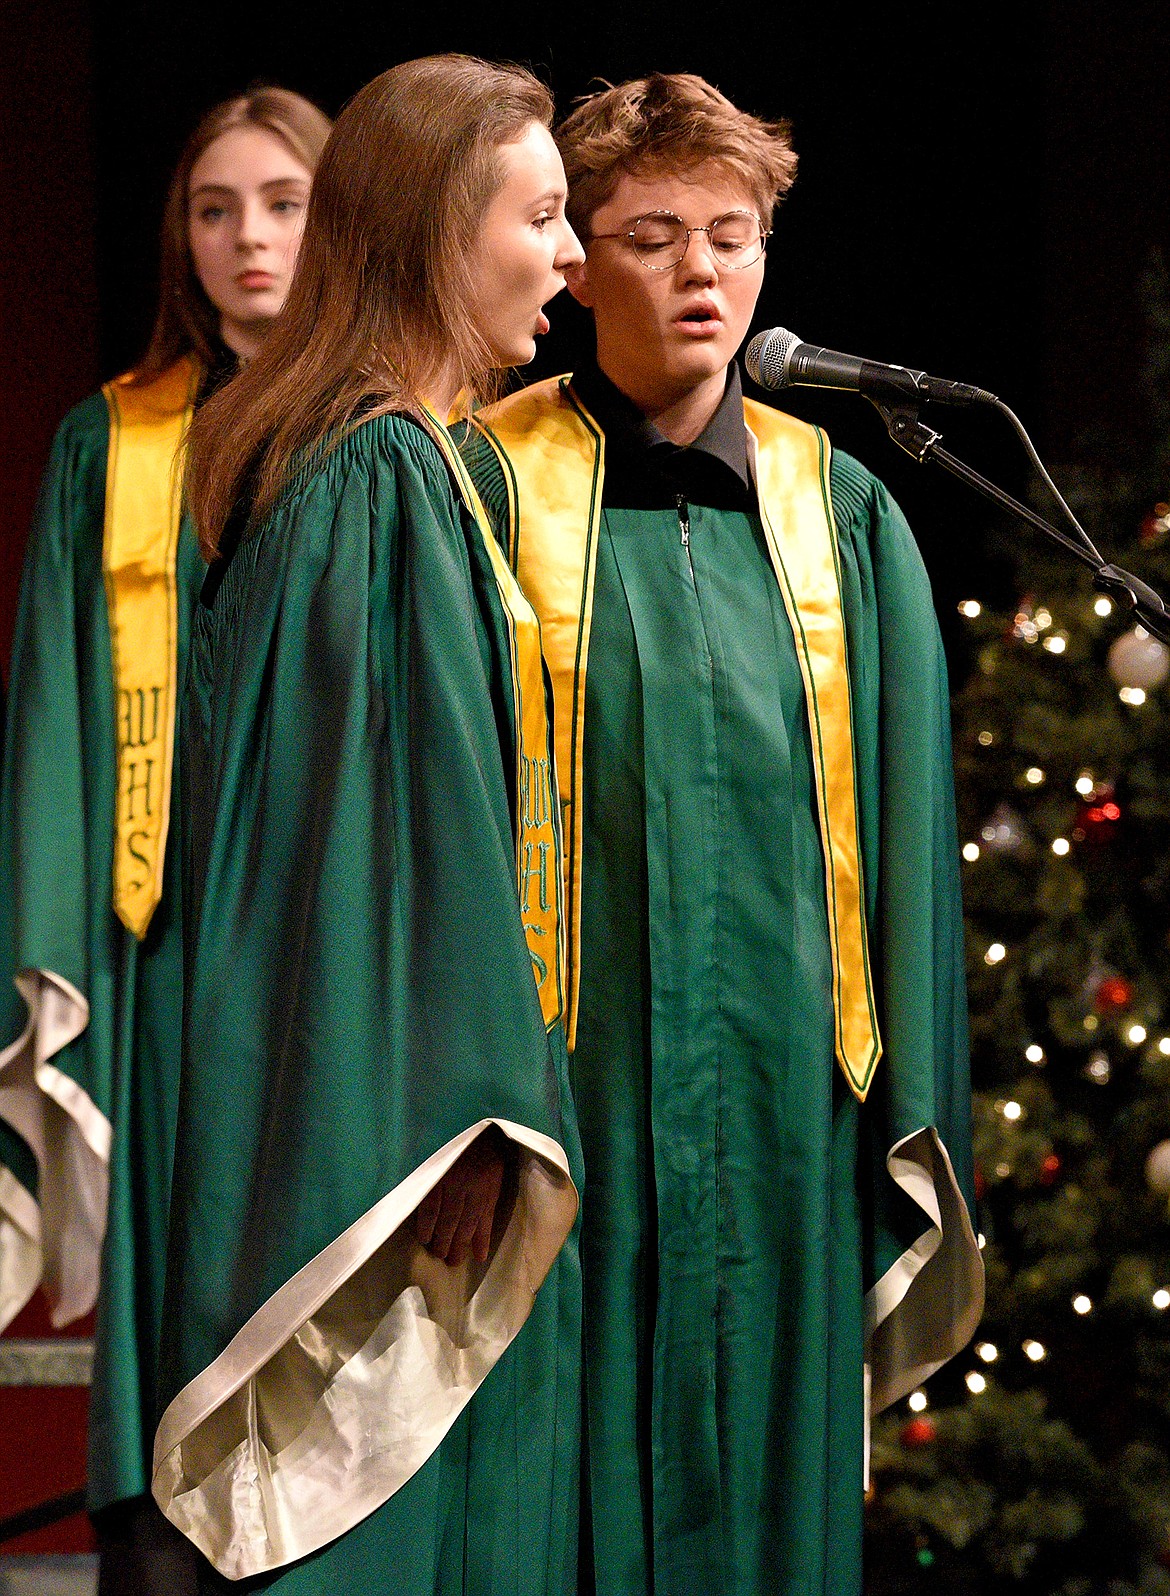 Students Fiona Shanahan and Grayson Wood perform at the Whitefish High School and Middle School winter choir concert at the Performing Arts Center on Dec. 8. (Whitney England/Whitefish Pilot)